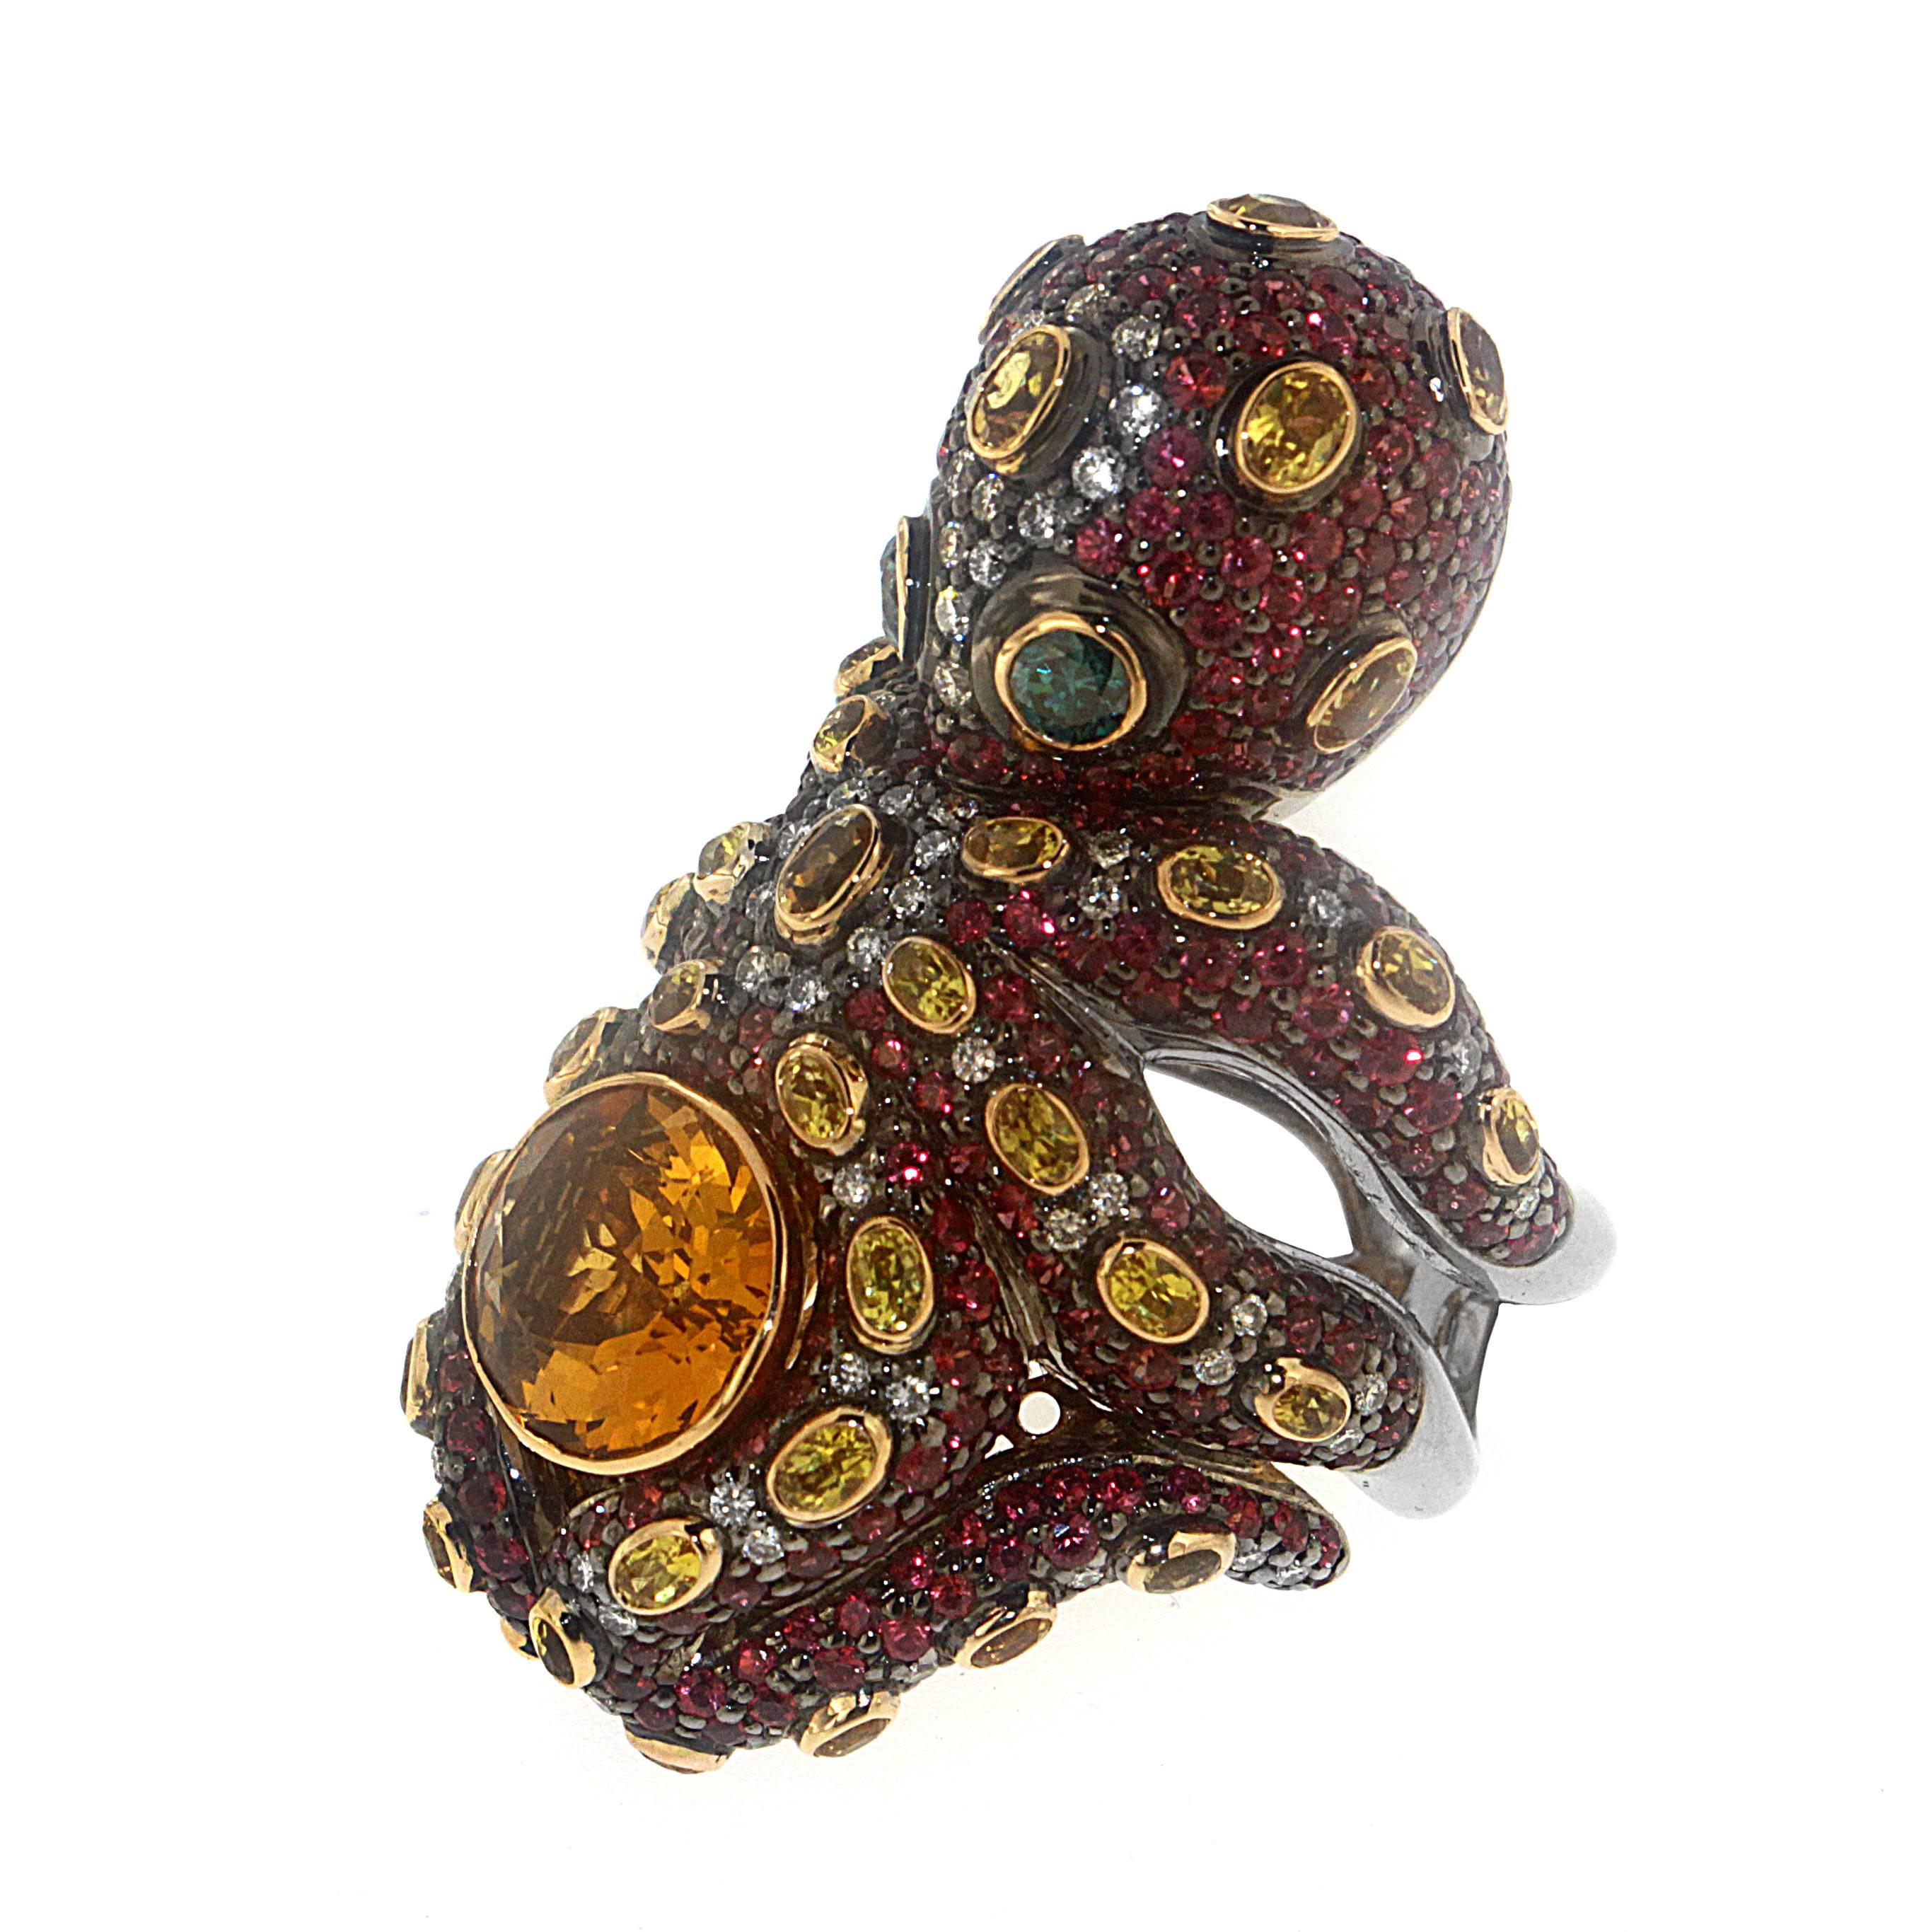 Bask in the warm glow of 5.20 Carats of Citrine Quartz set as the center stone in this one of a kind whimsical creation. The octopus' tentacles wrap around your finger and display the full magnitude of 10.52 Carats of Red Sapphires, 4.36 Carats of